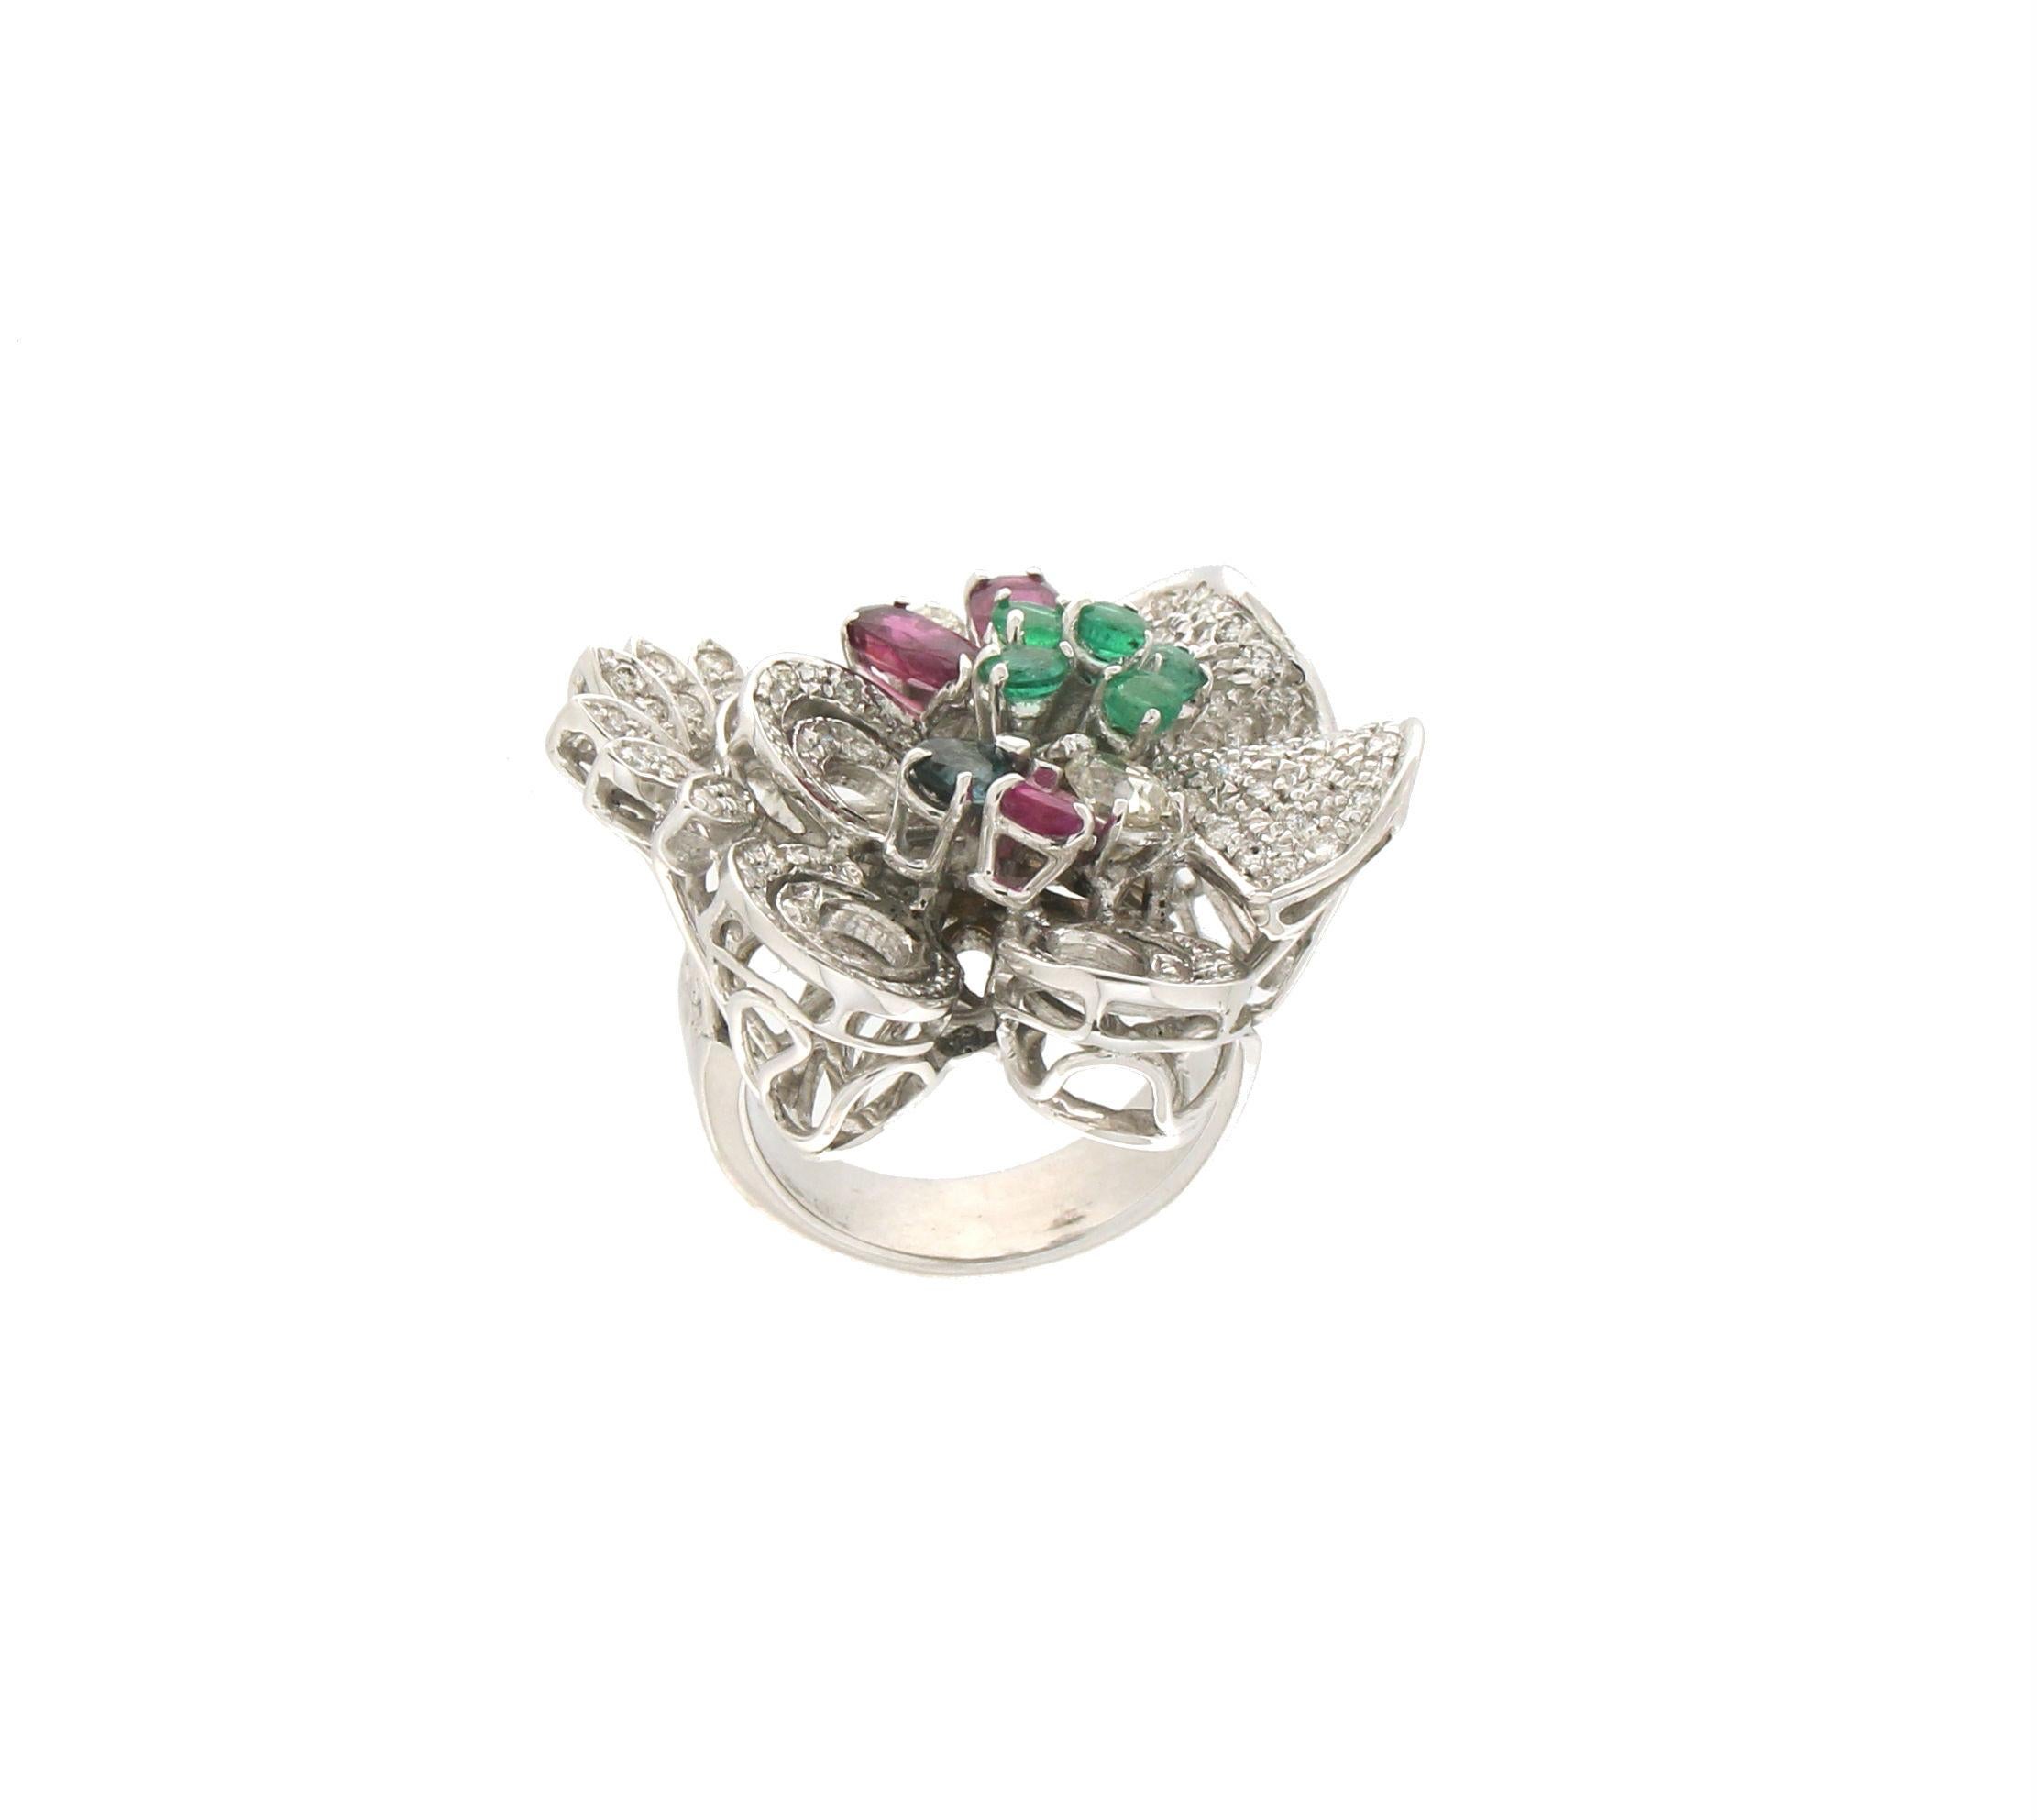 18 karat white gold cocktail ring. Handmade by our artisans assembled with diamonds,sapphires,rubies and emeralds

Diamonds weight 1.35 karat
Ruby,sapphires,emeralds total weight 3
Ring total weight 25.70 grams
Ring size 8.50 US 17.80 Ita
(all rings